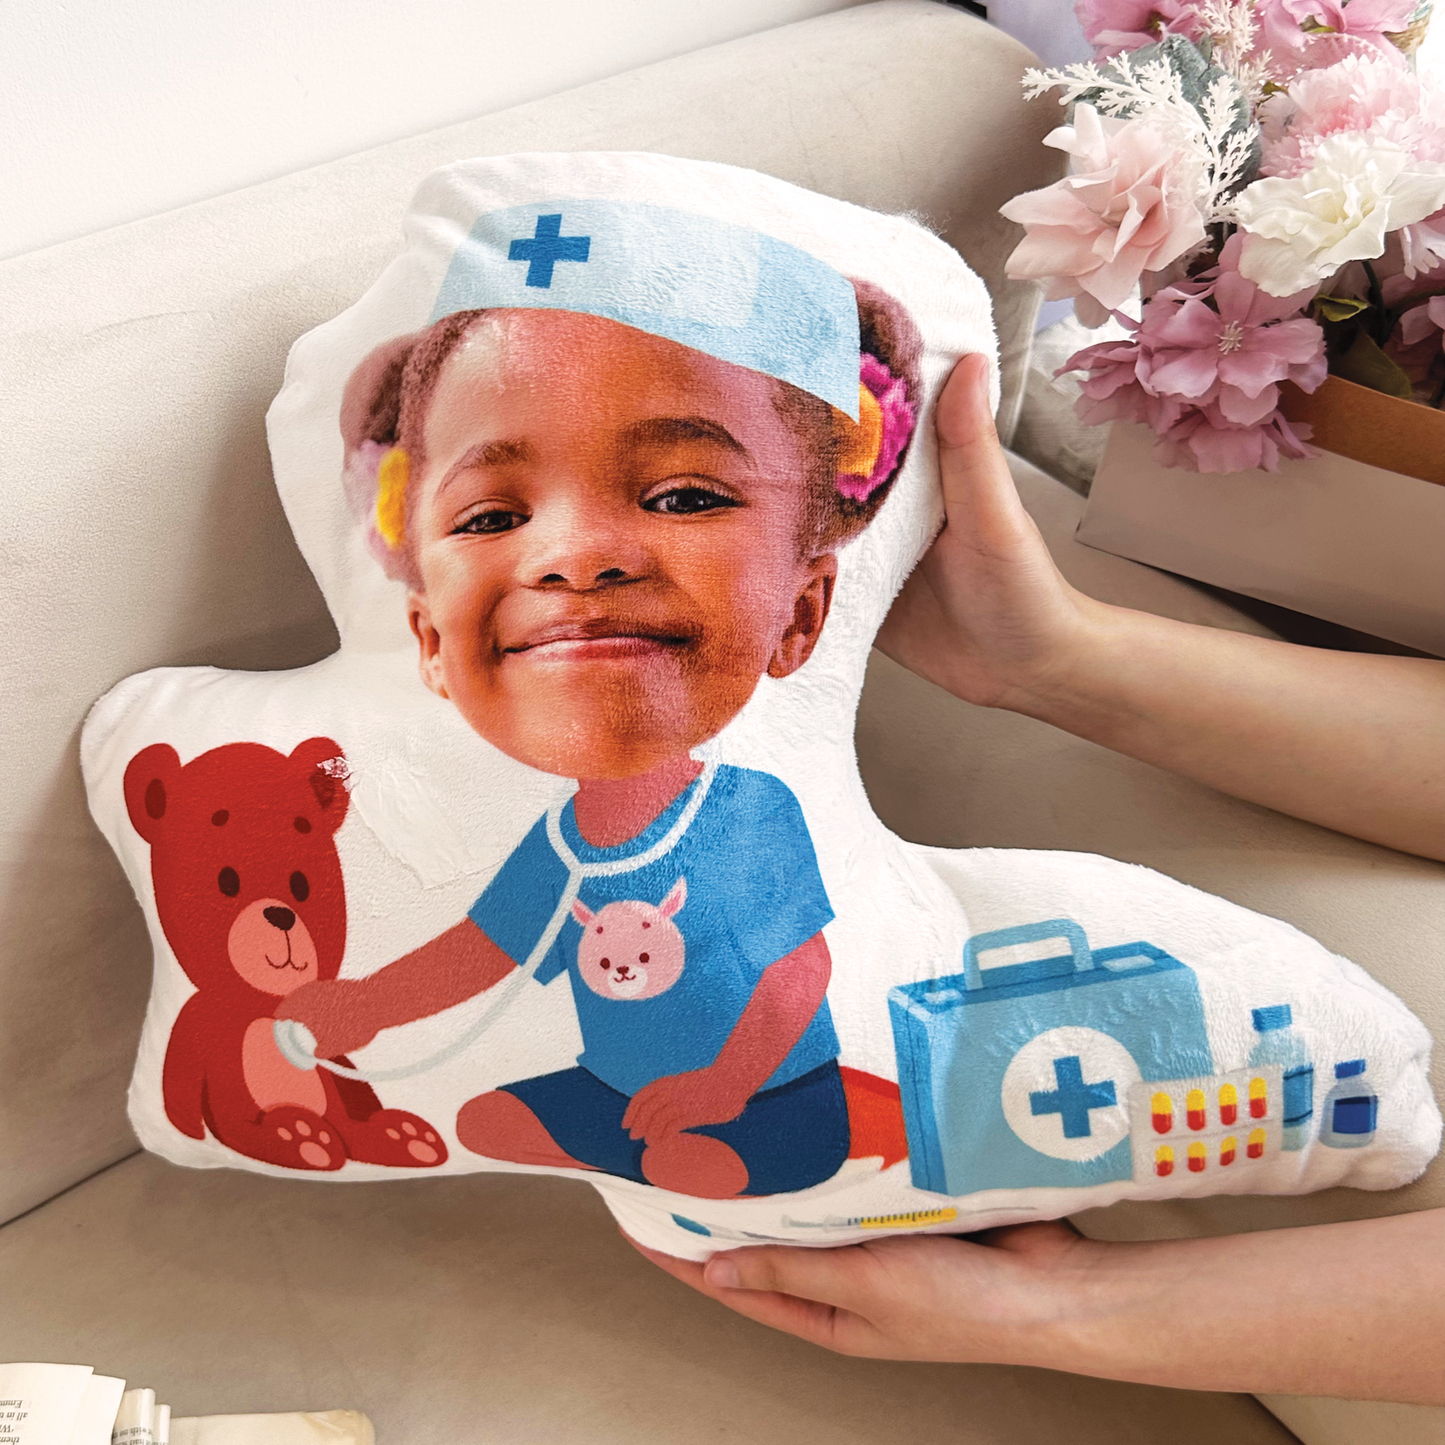 Doctor Nurse Kids Dream Jobs Sons Daughters - Personalized Photo Custom Shaped Pillow